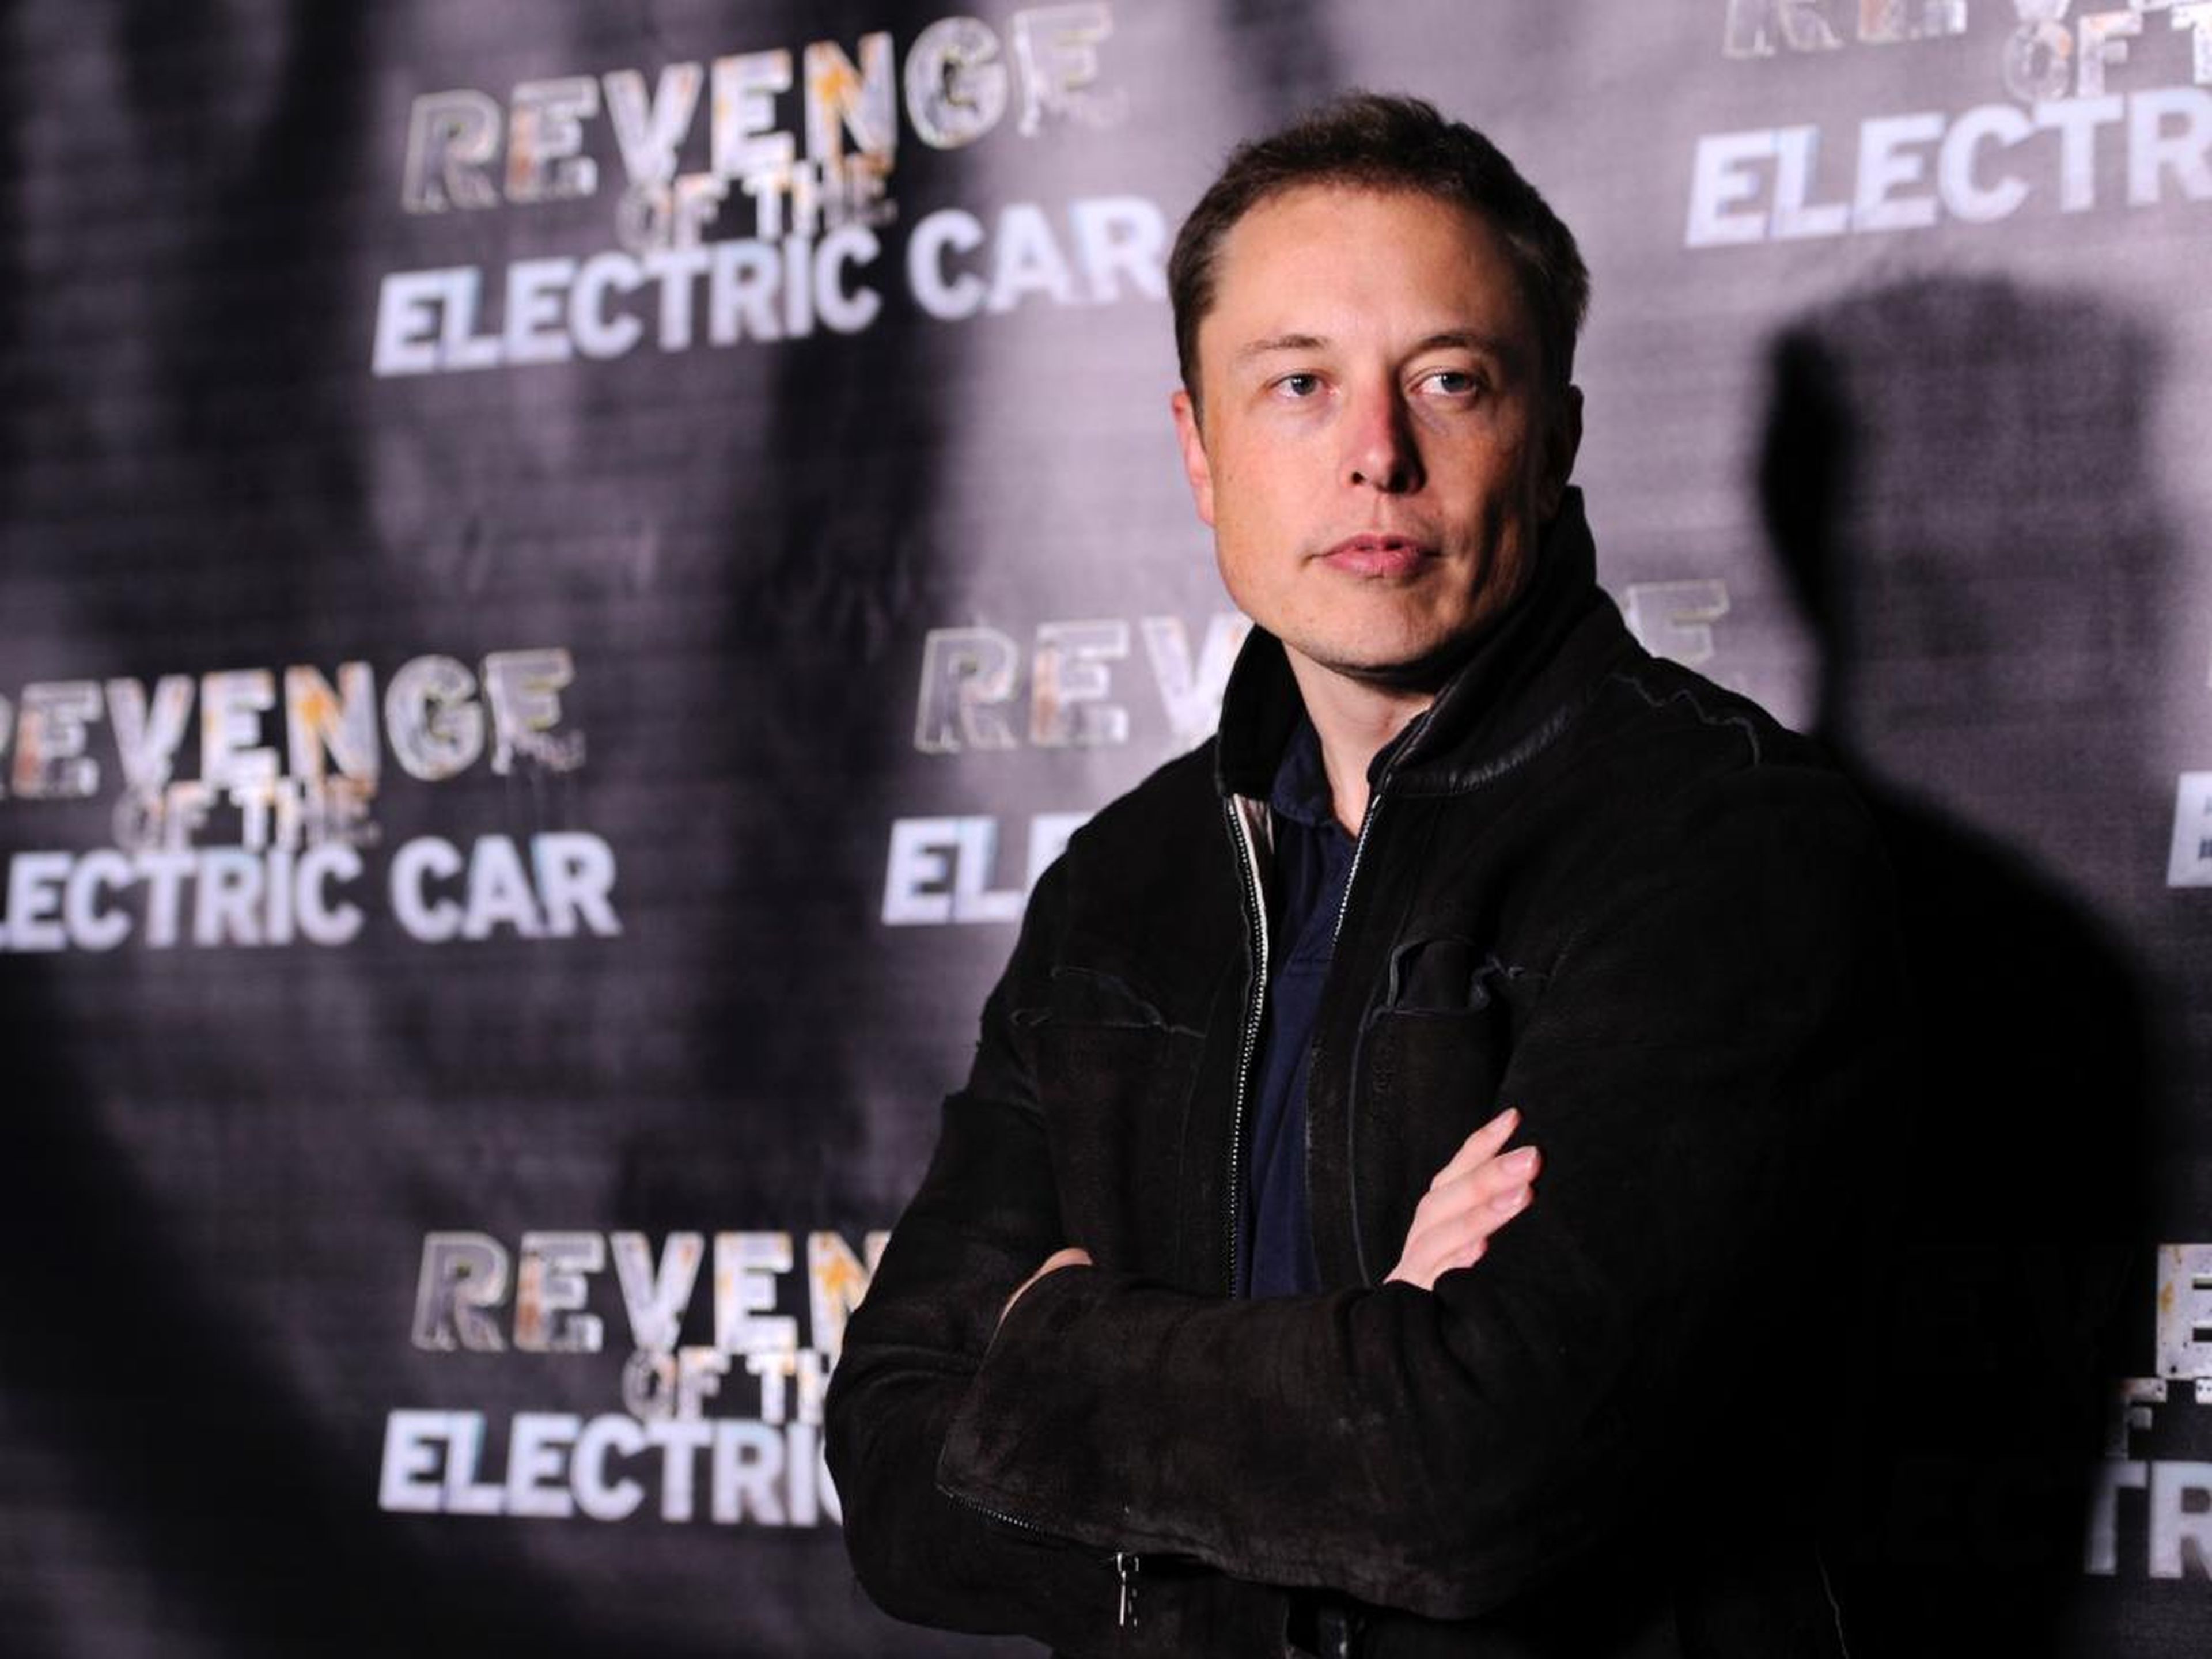 A boss should do what's right for the company, regardless of people's reactions. Elon Musk pictured.